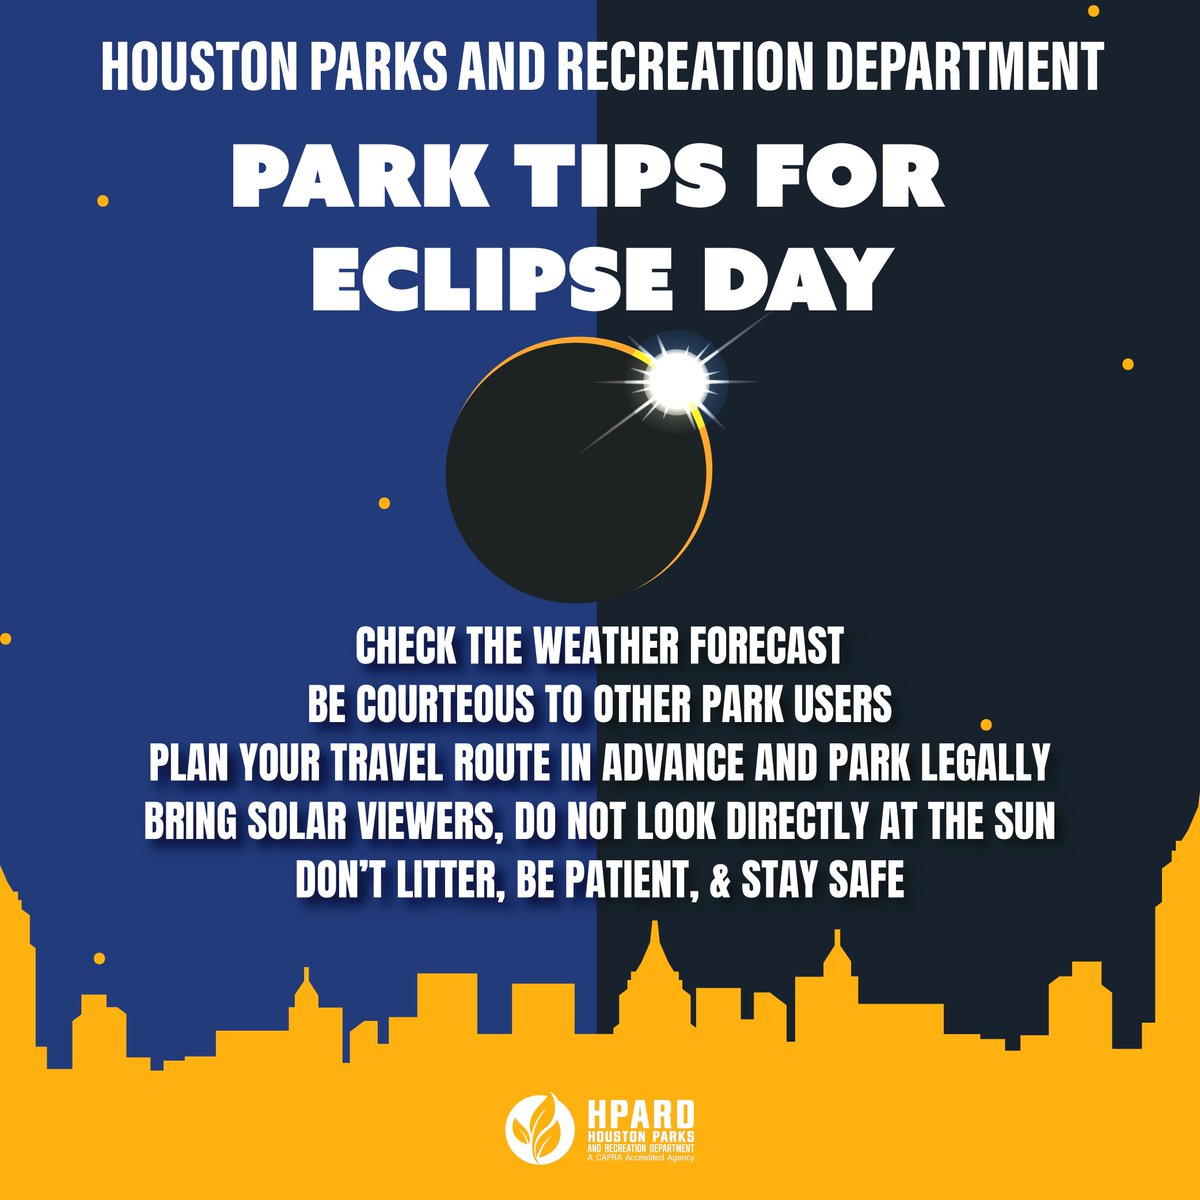 If you are planning to experience the solar eclipse at a Houston park today, plan ahead. 🕶️☀️